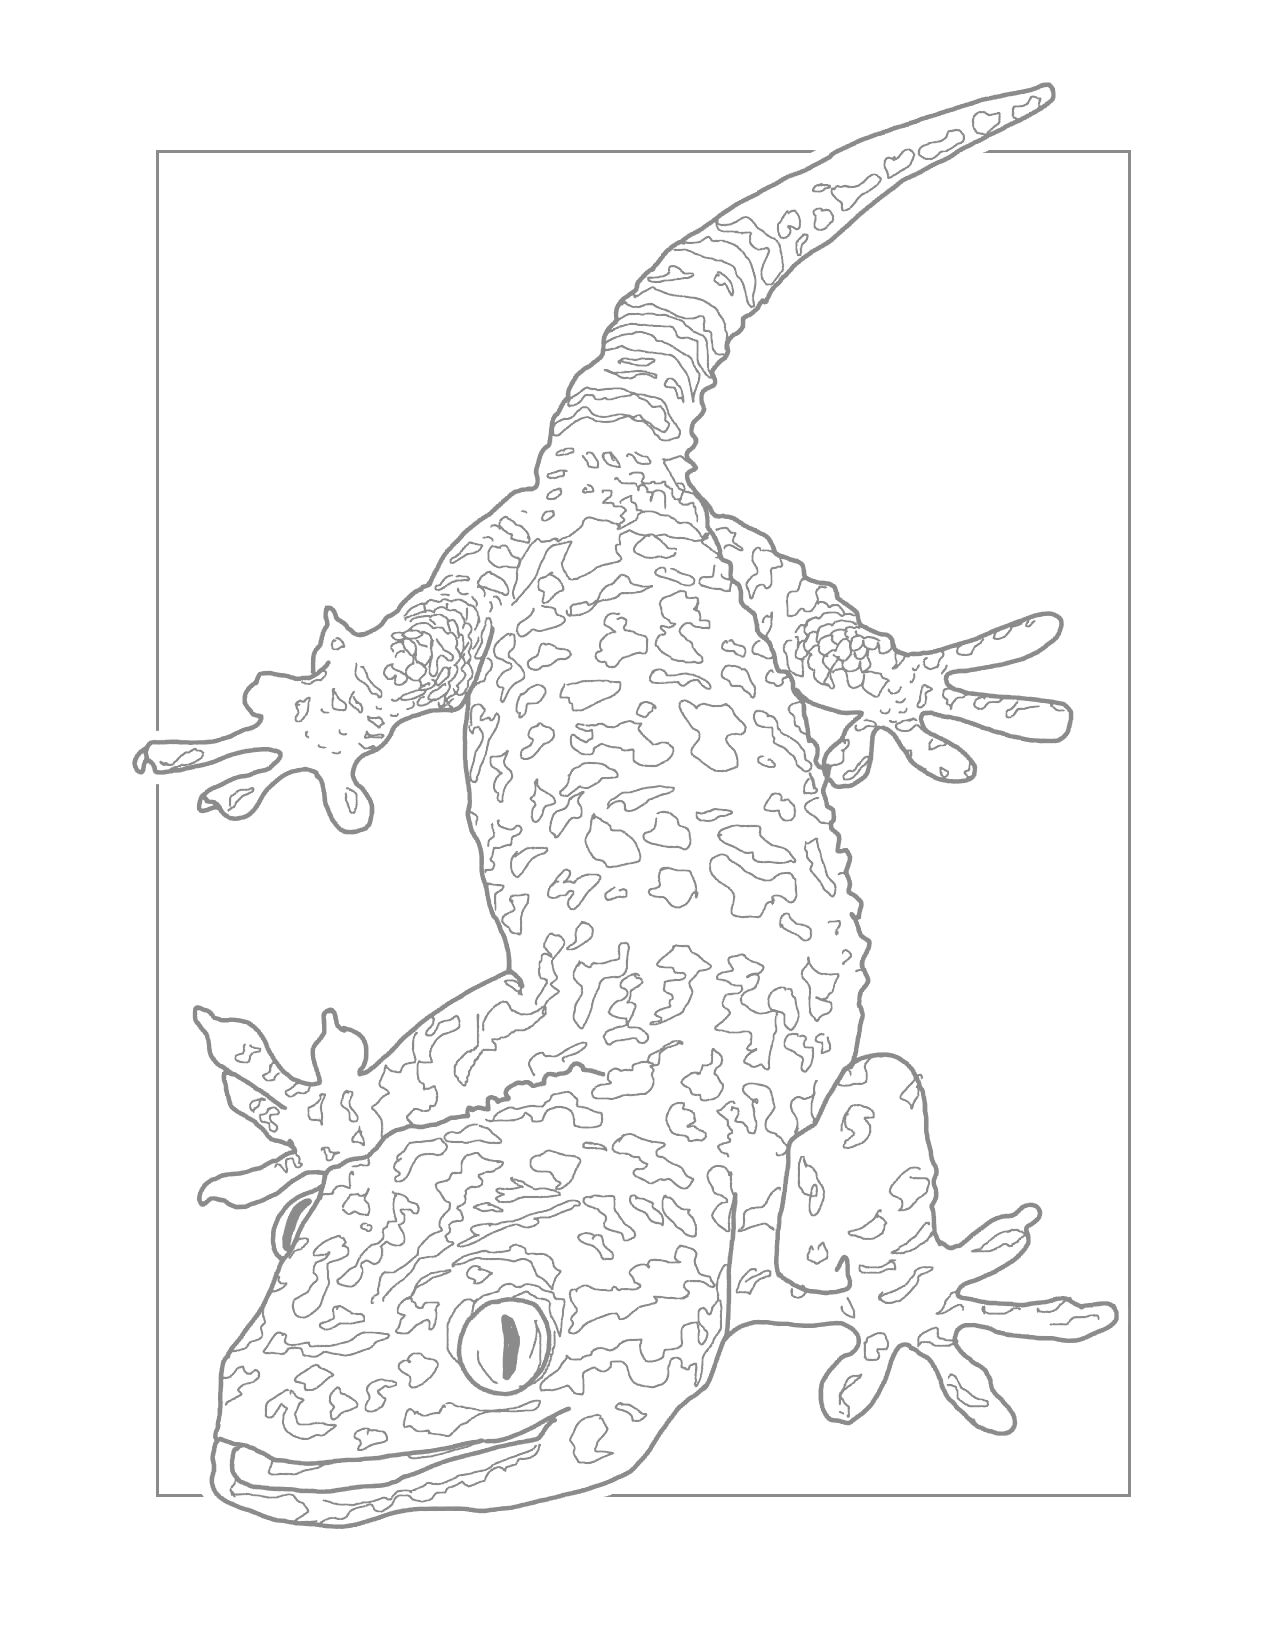 Gecko Lizard Traceable Coloring Page